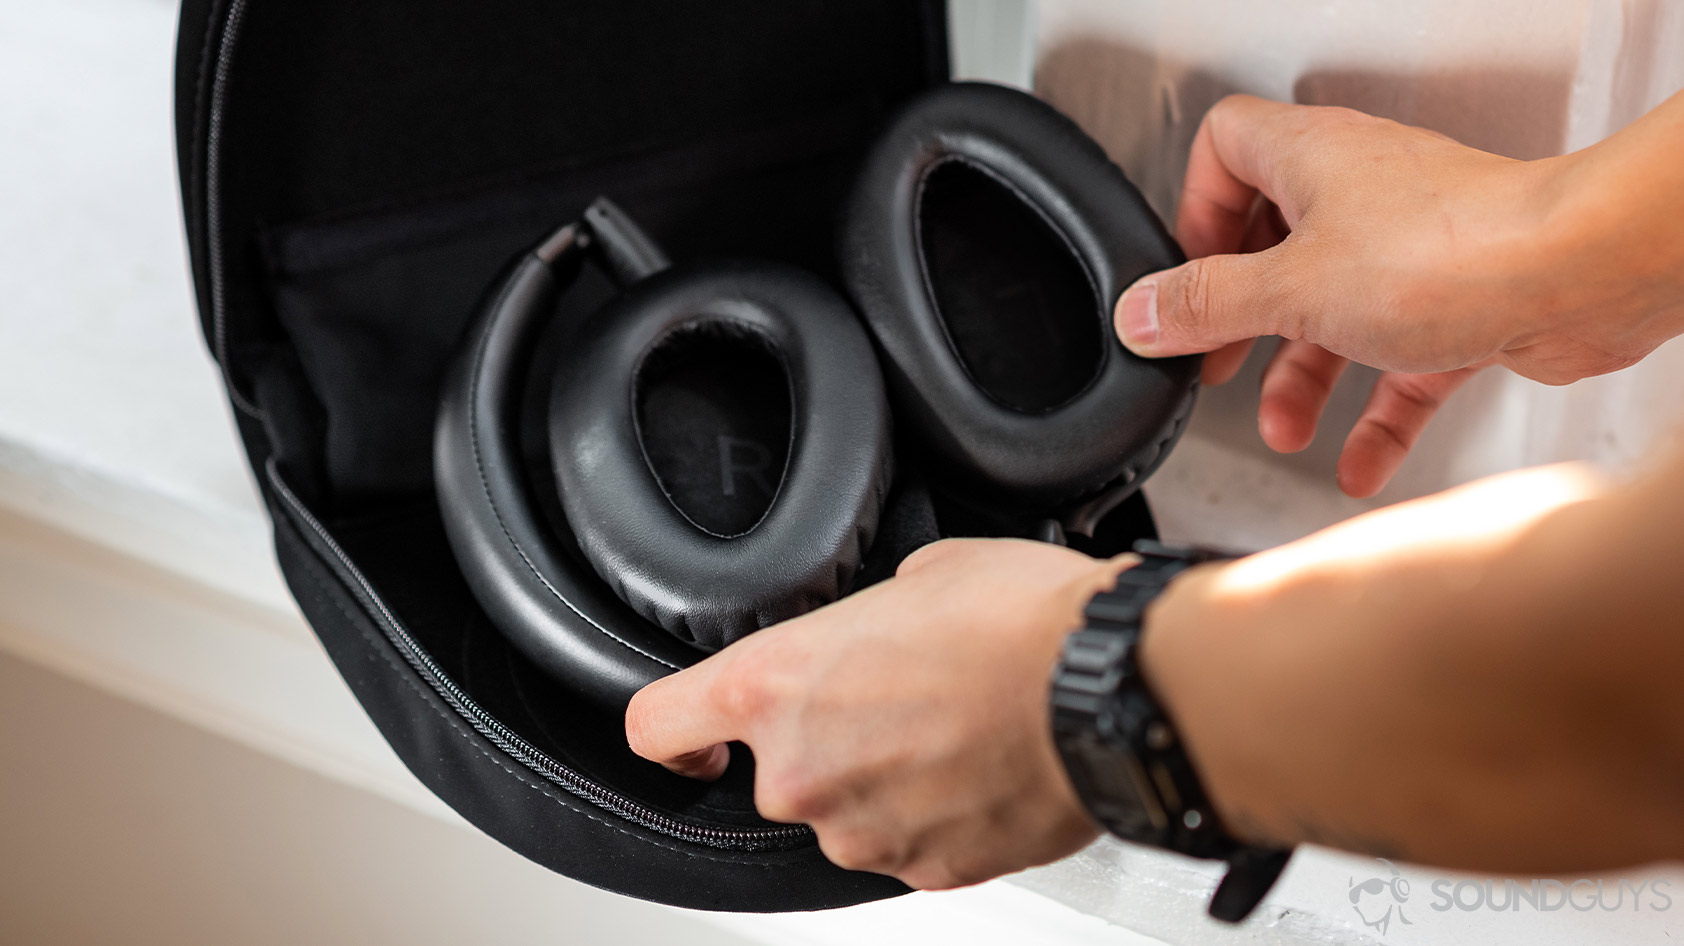 The Sennheiser PXC 550-II noise canceling headphones being placed into the travel case.